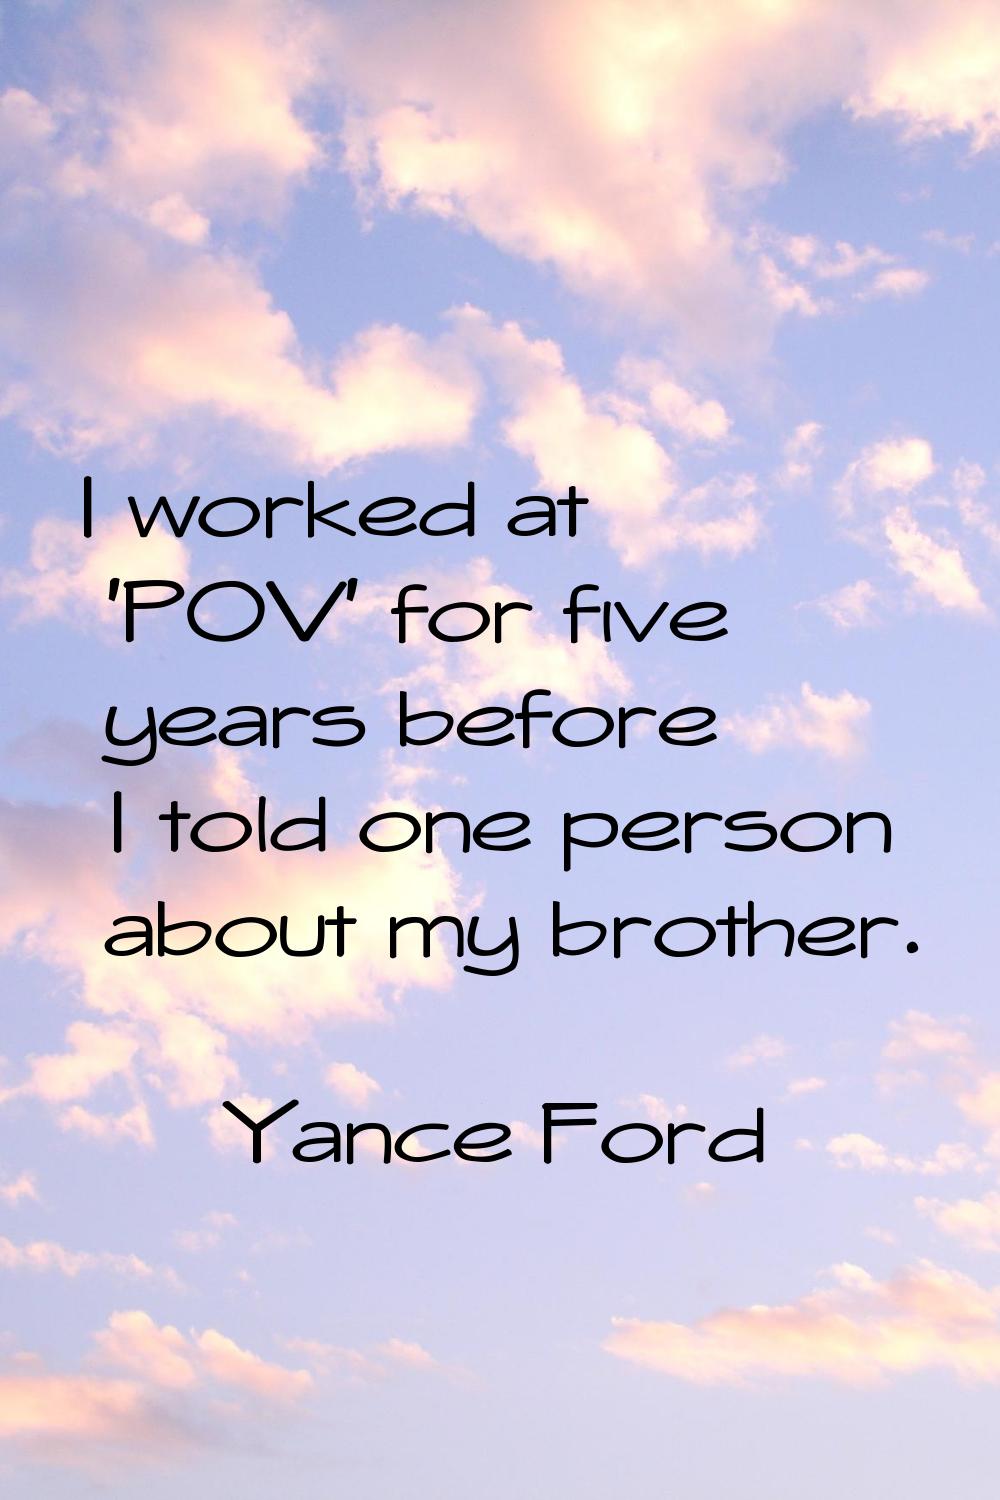 I worked at 'POV' for five years before I told one person about my brother.